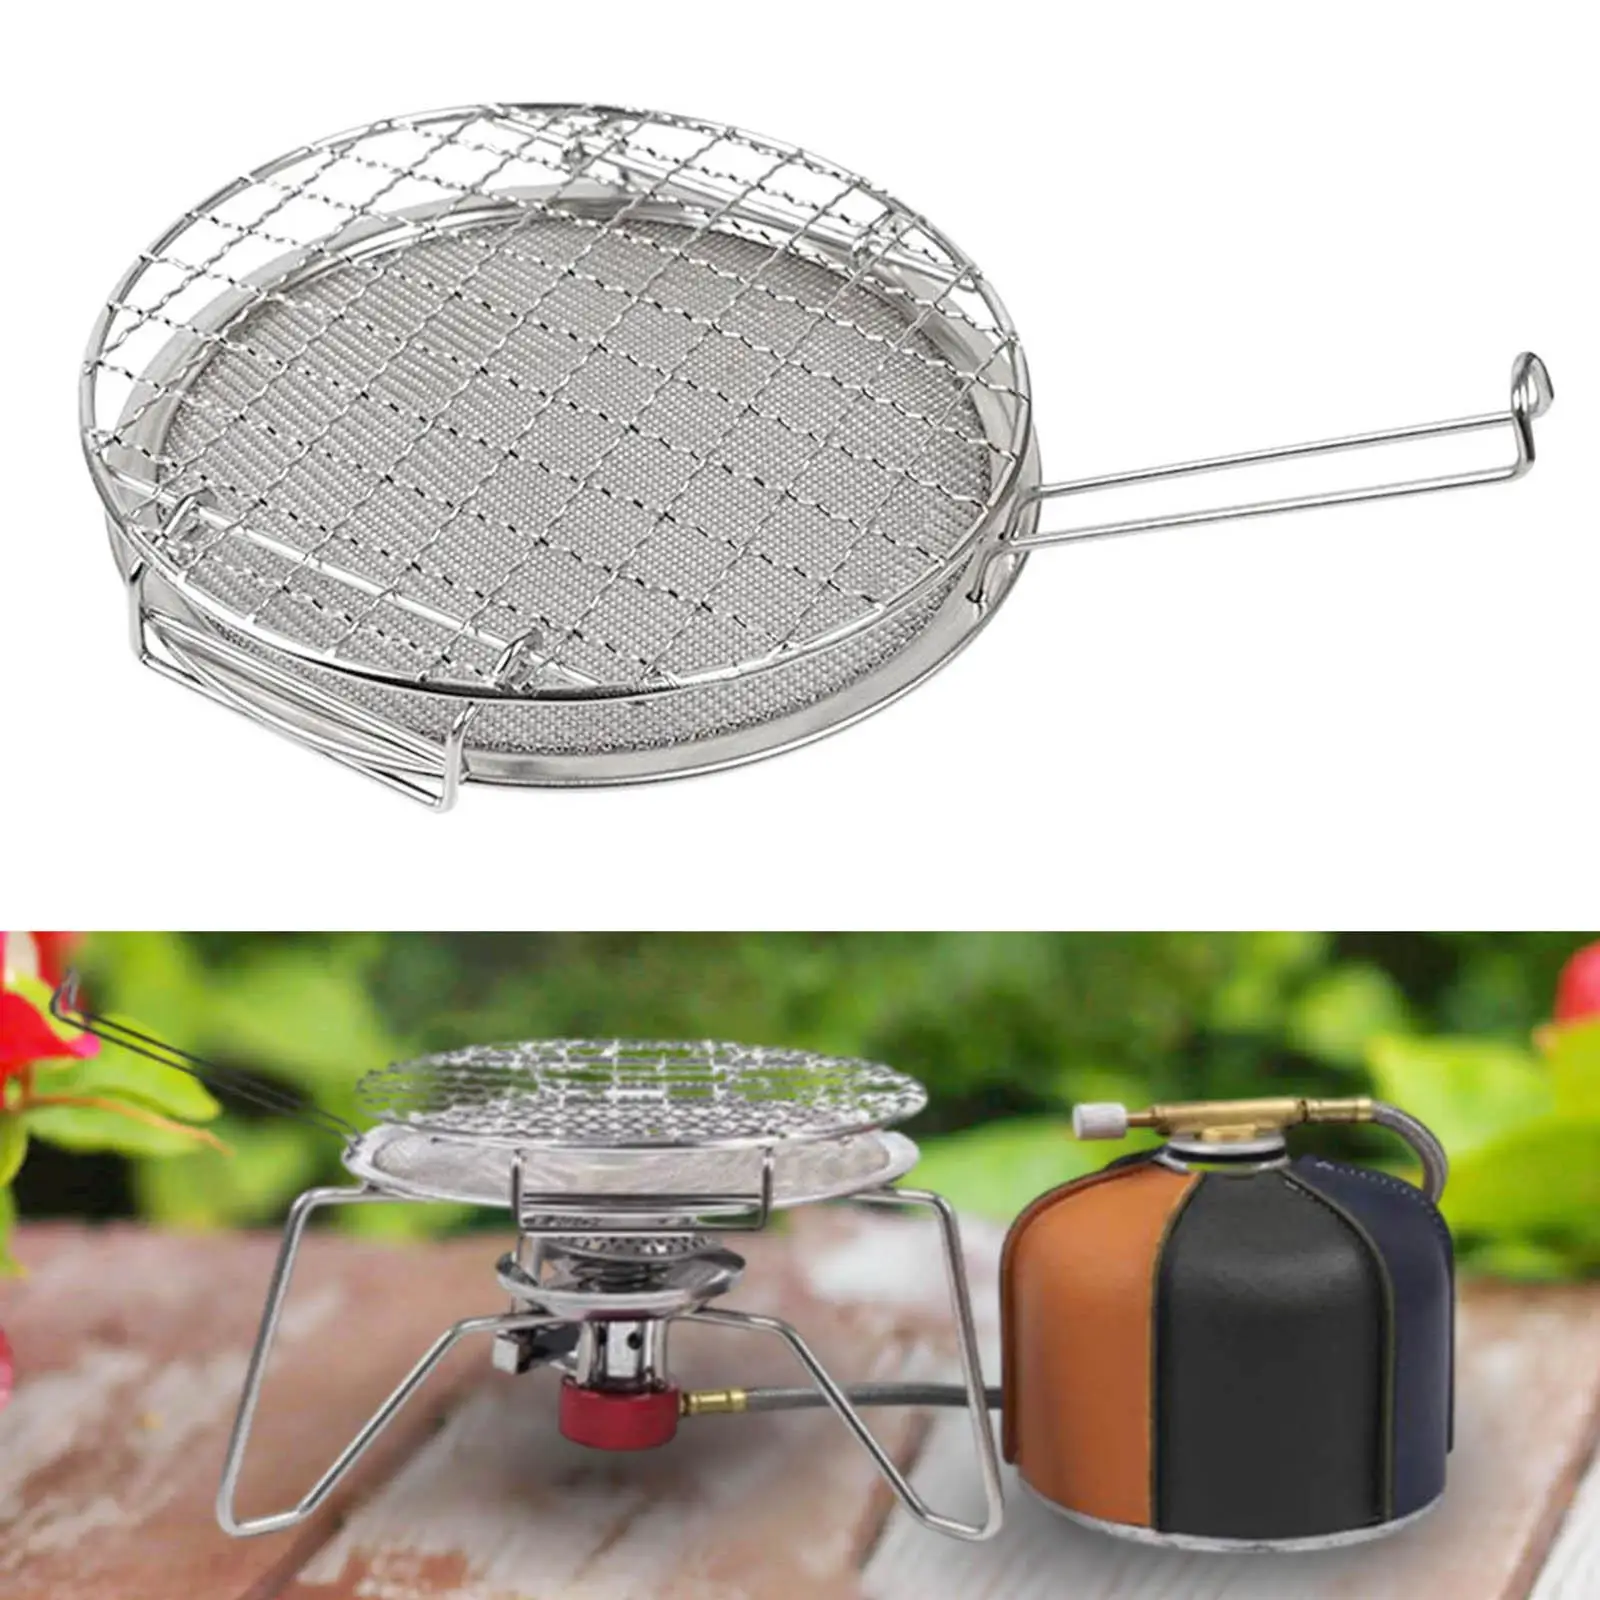 Barbecue Grill Cooking Rack Round Camping Grill Stainless Steel for Travel